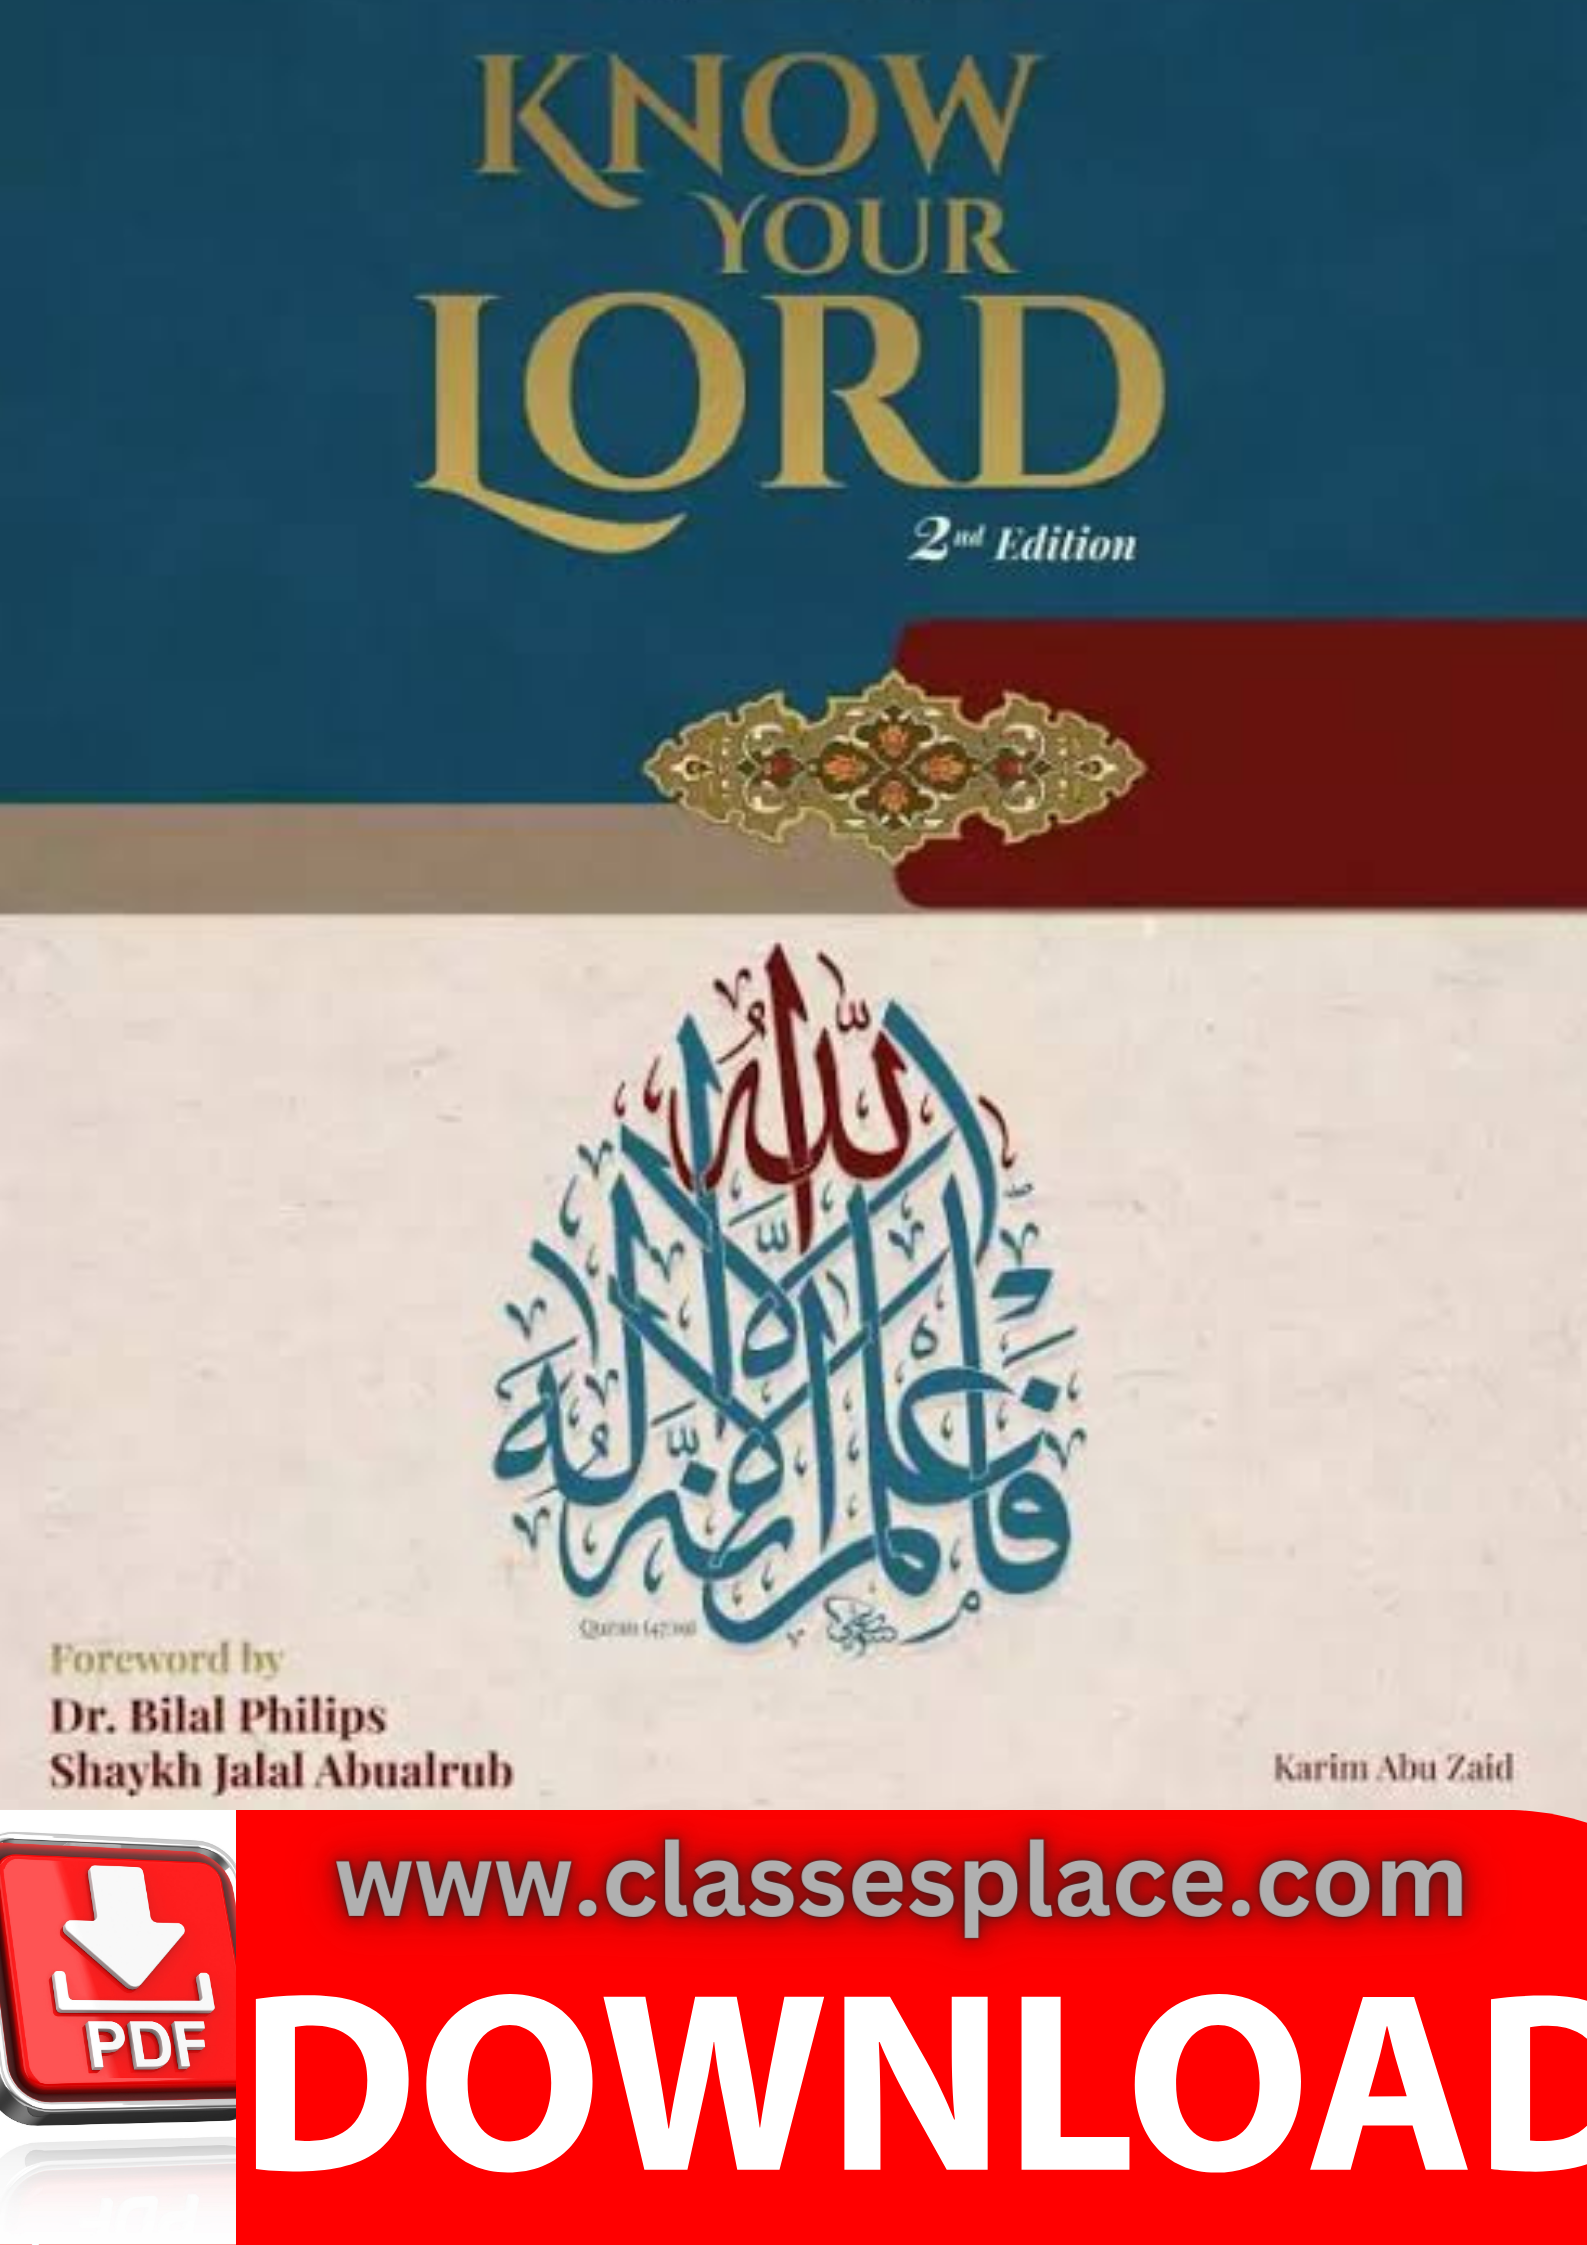 Download the Know Your Lord PDF: A Complete Guide to Strengthening Your Spiritual Bond.